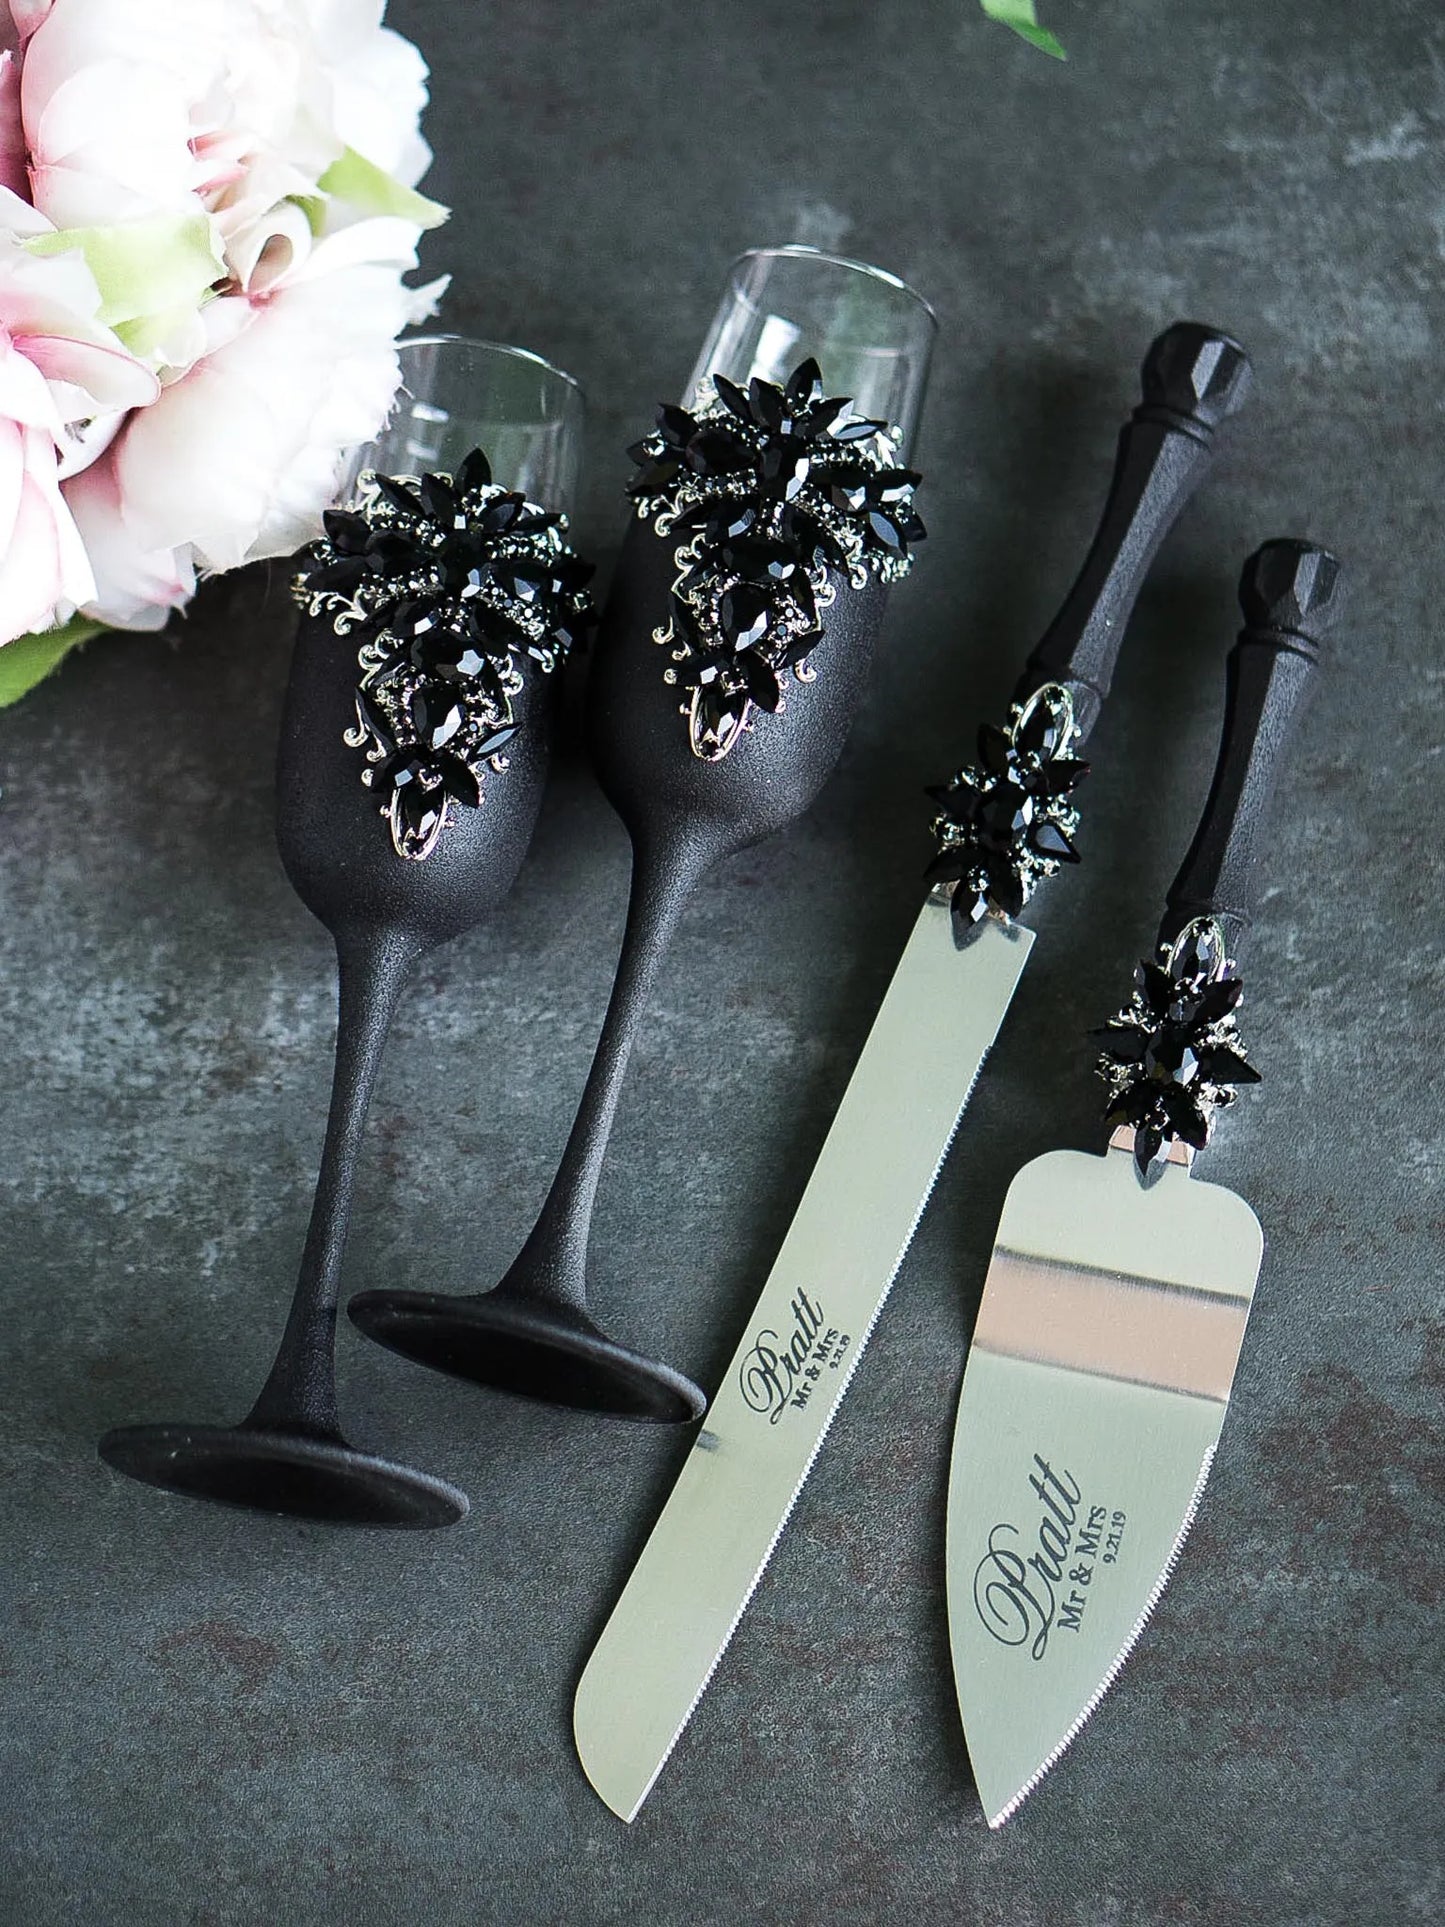 Gothic Engraved Black and Silver Crystal Mr. and Mrs. Cake Knife and Server Set